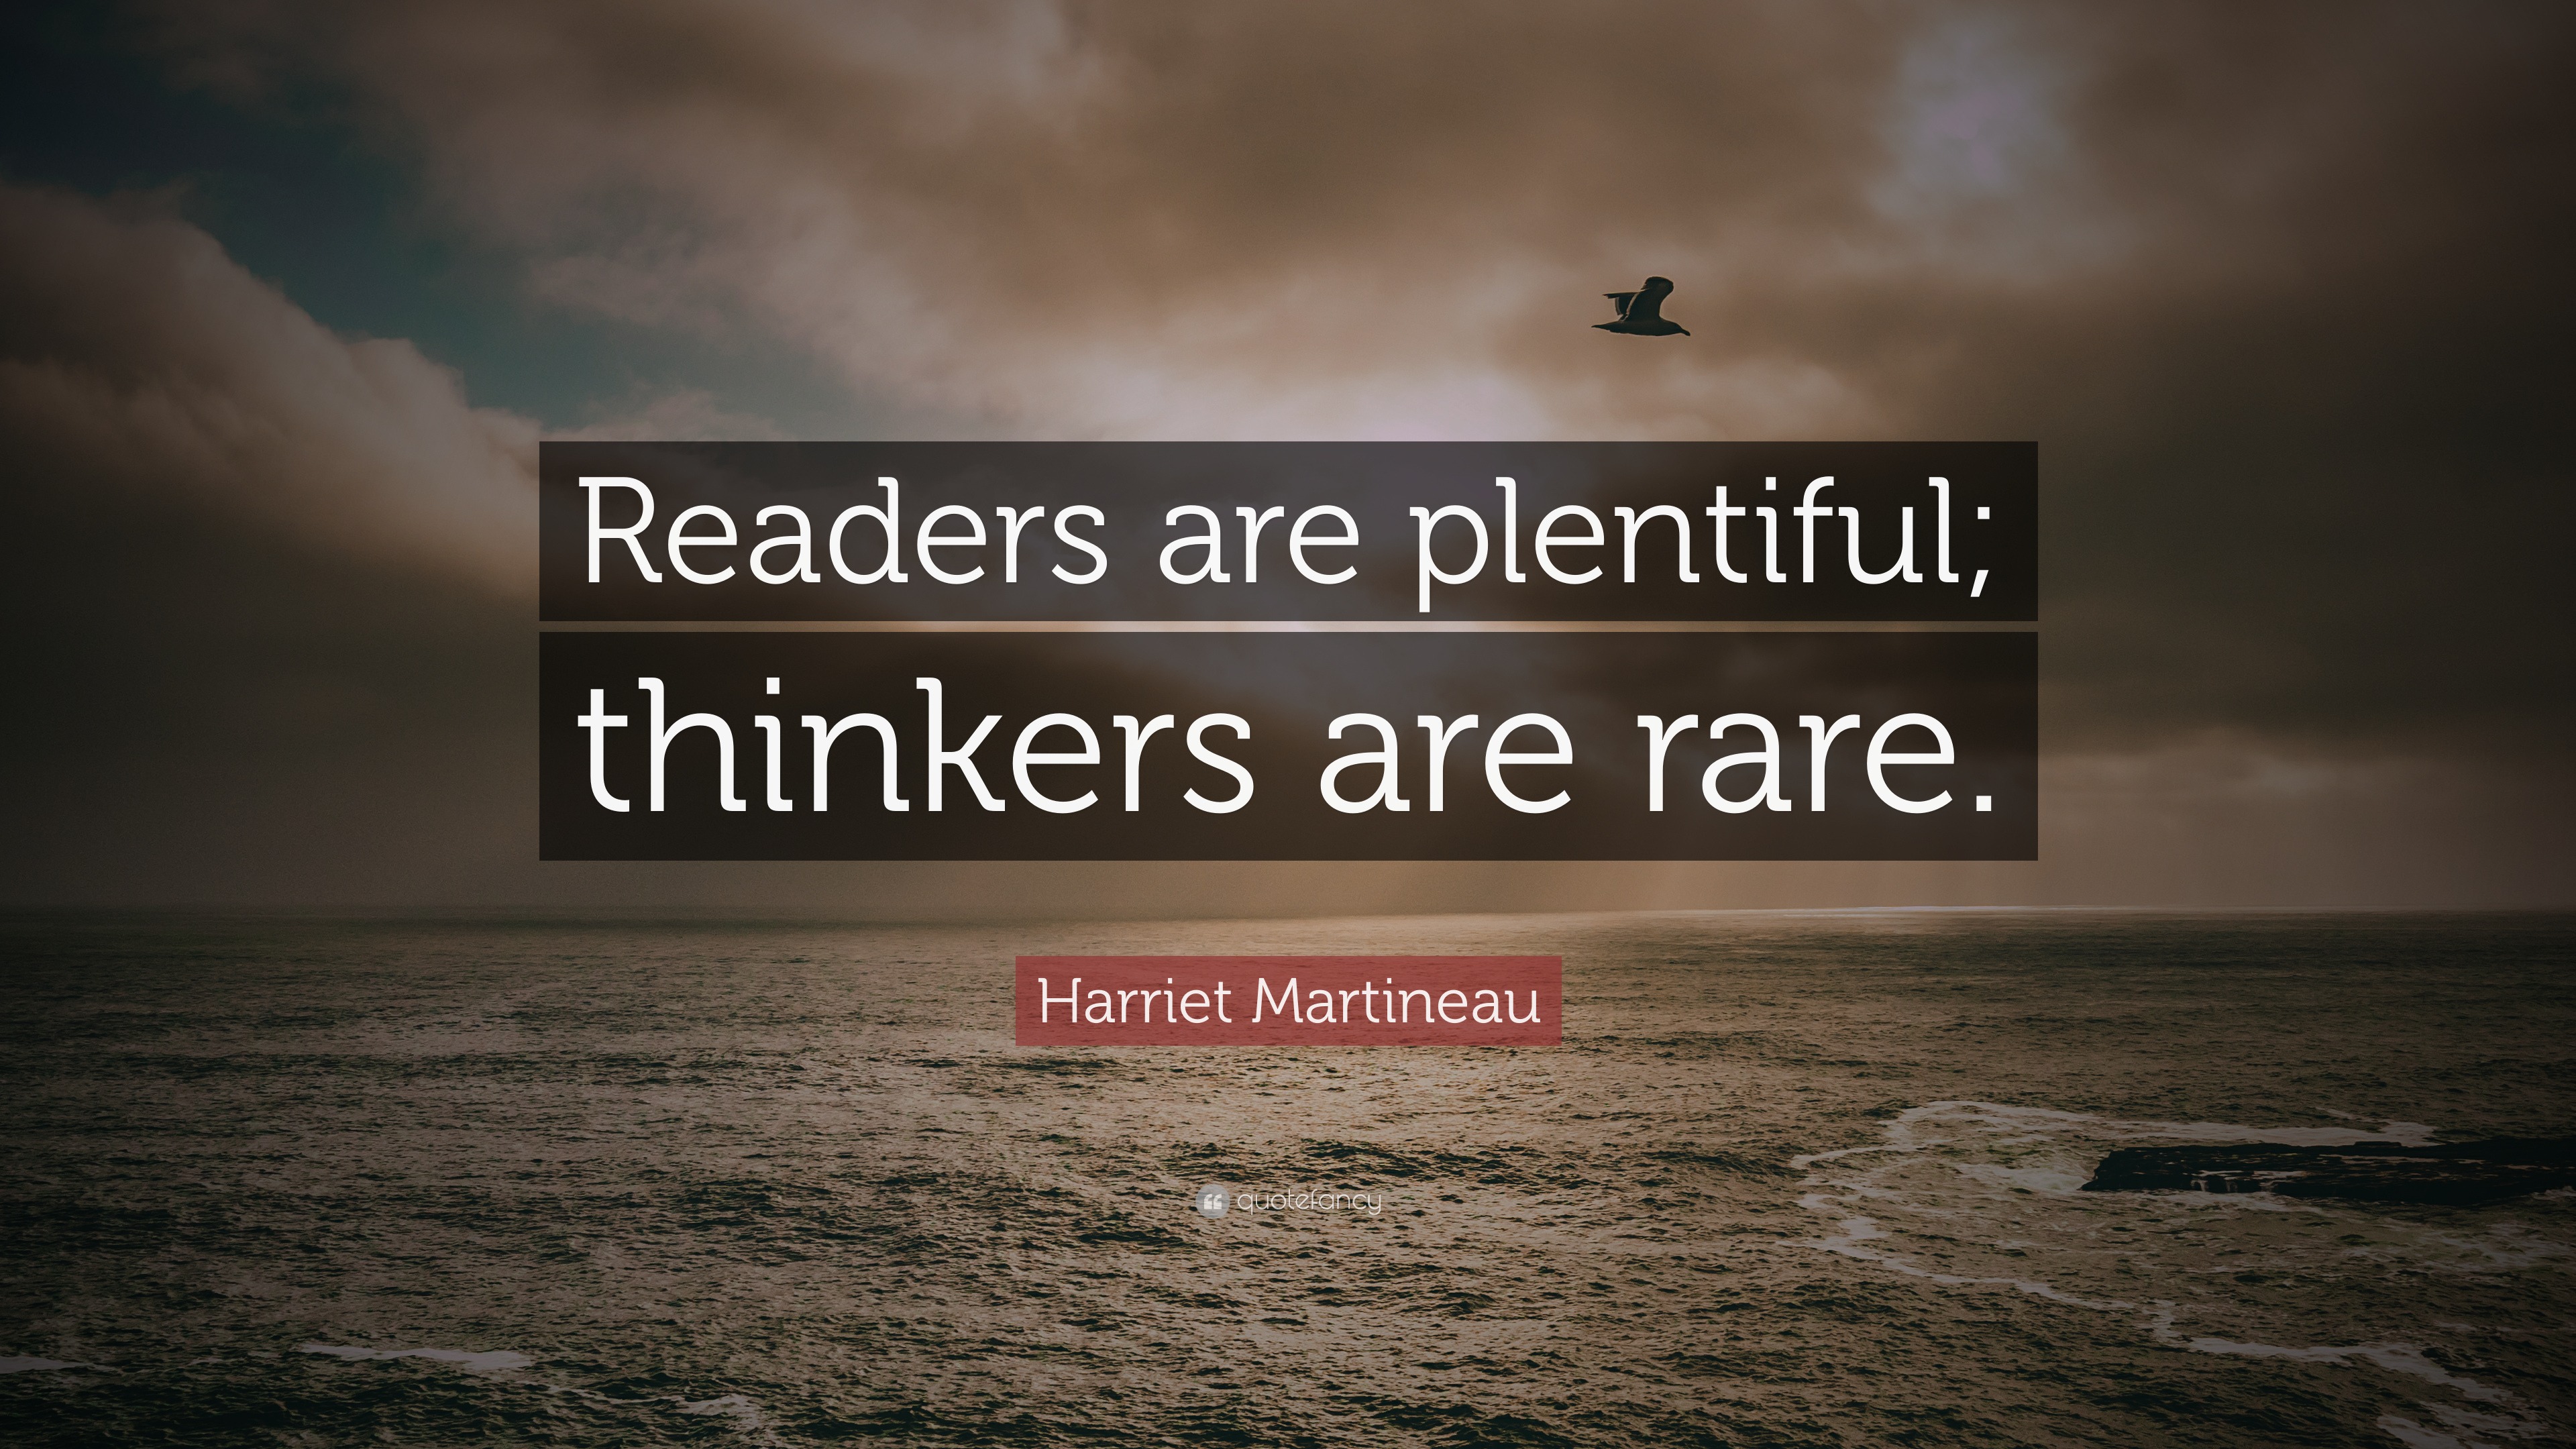 Harriet Martineau Quote: “Readers are plentiful; thinkers are rare.”